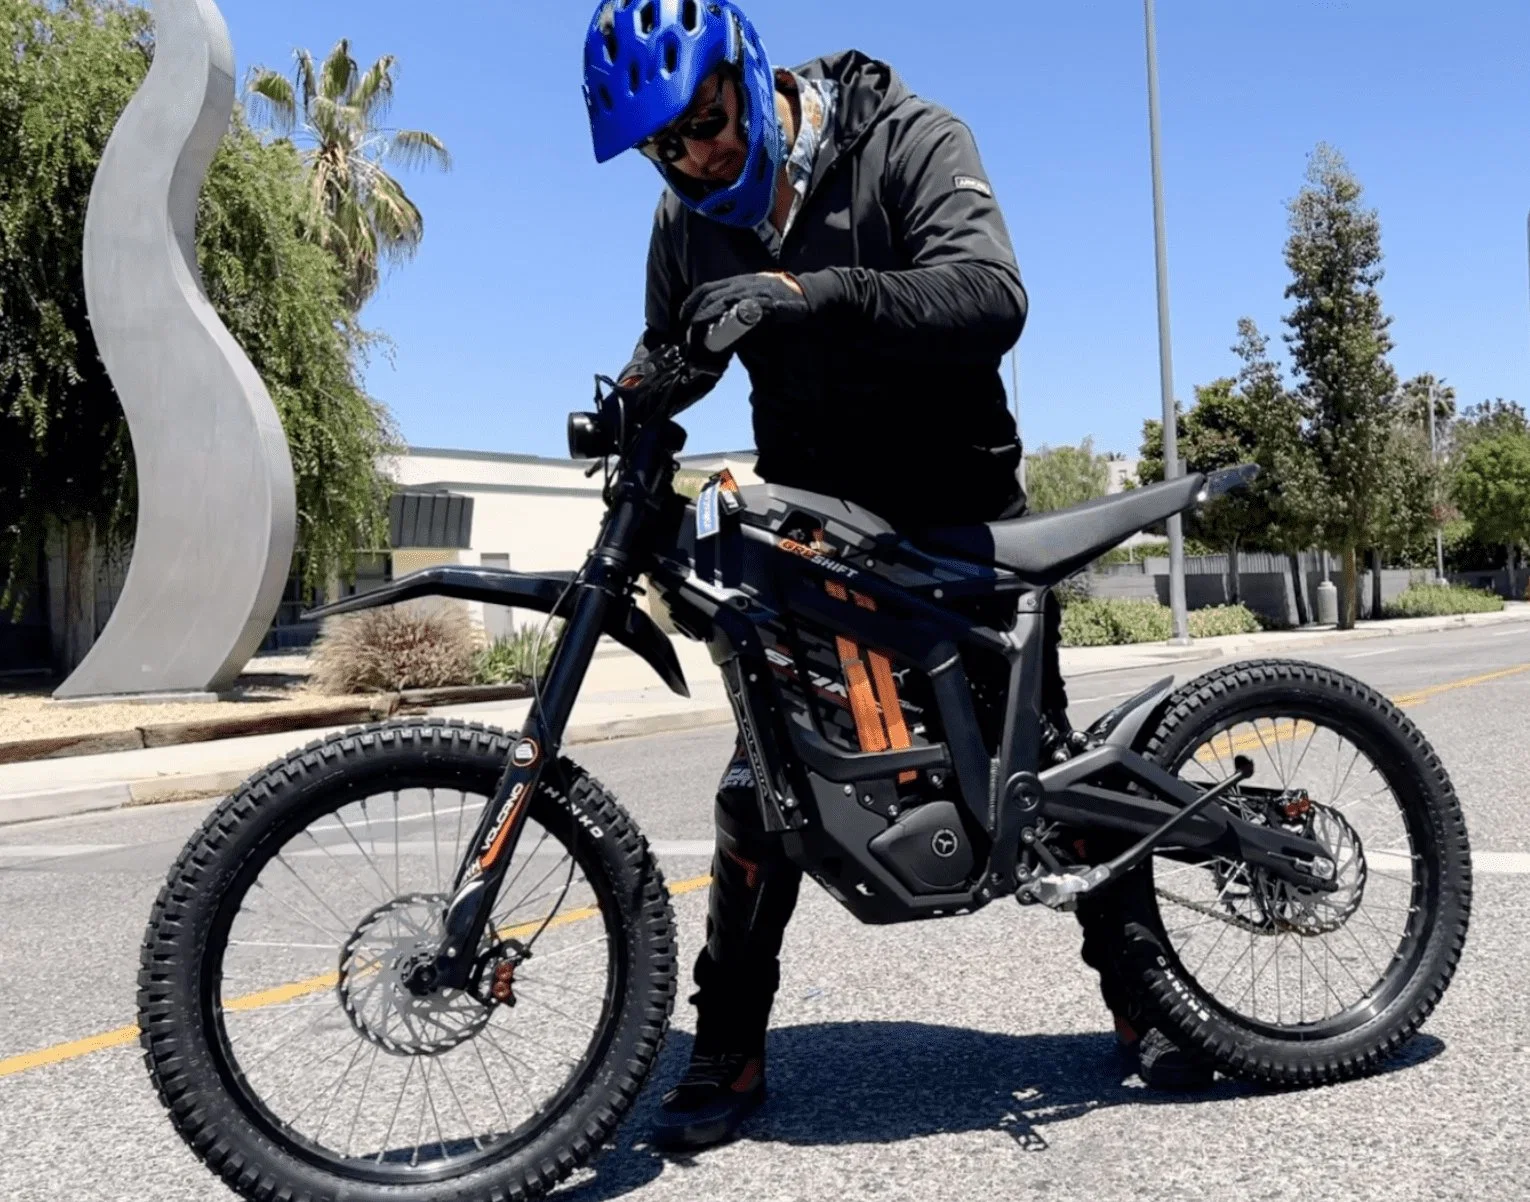 Talaria Sting Electric Bike Dirt Motorcycle High Performance off Road for Adults